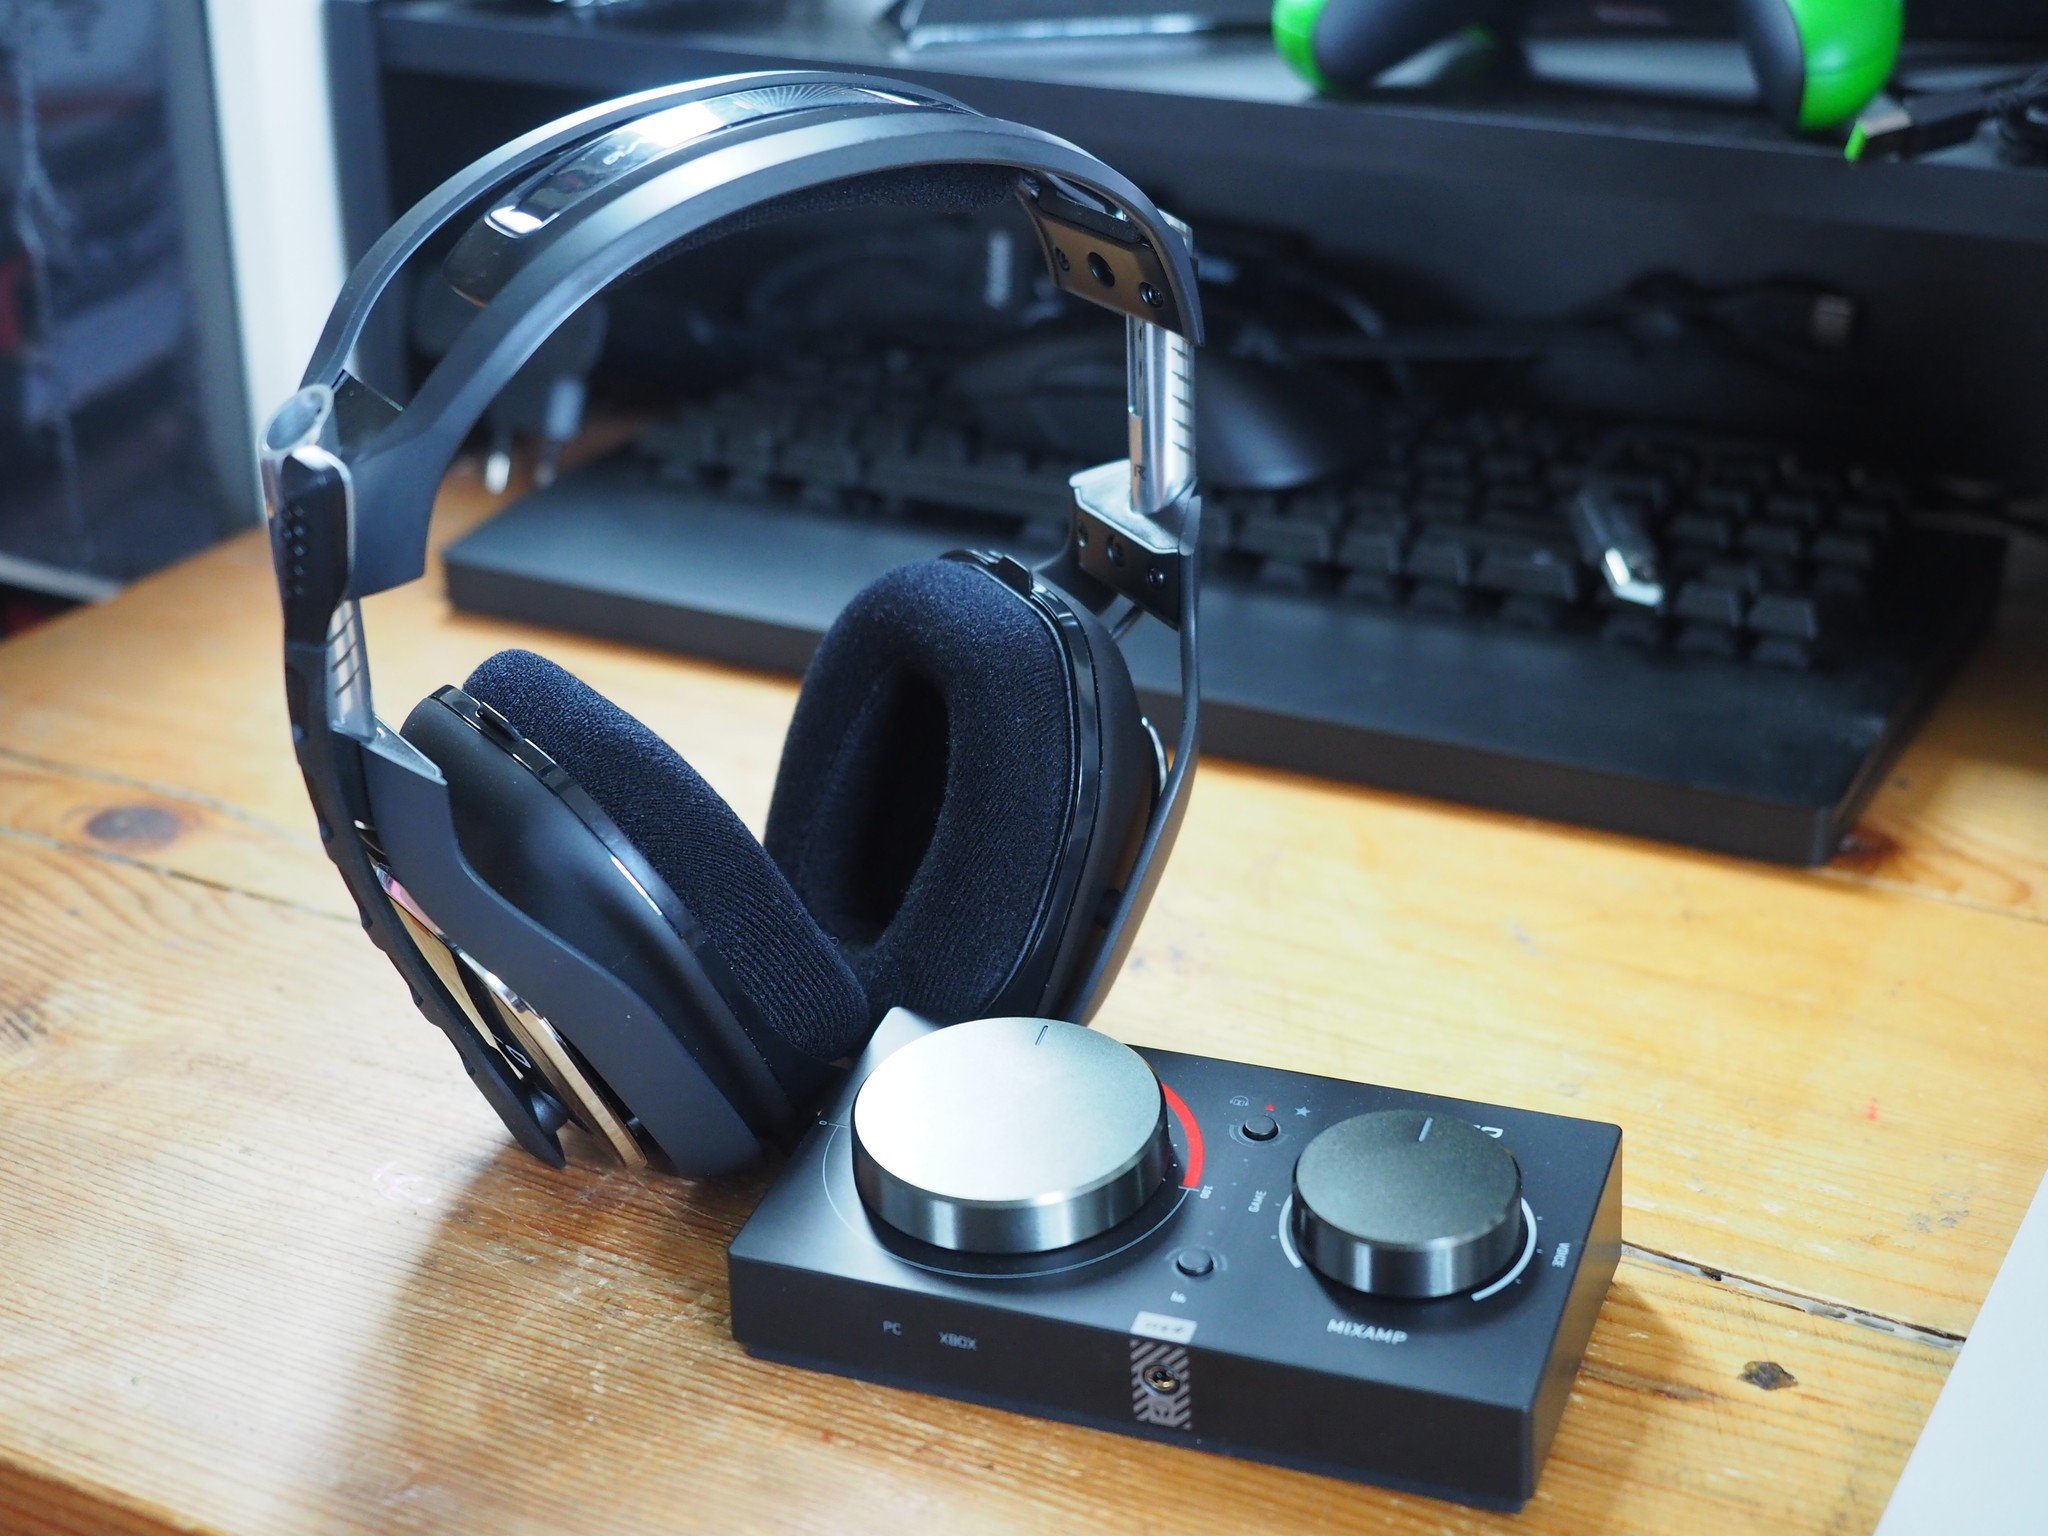 An Astro A40 TR with Mixamp sits on a wooden desk.